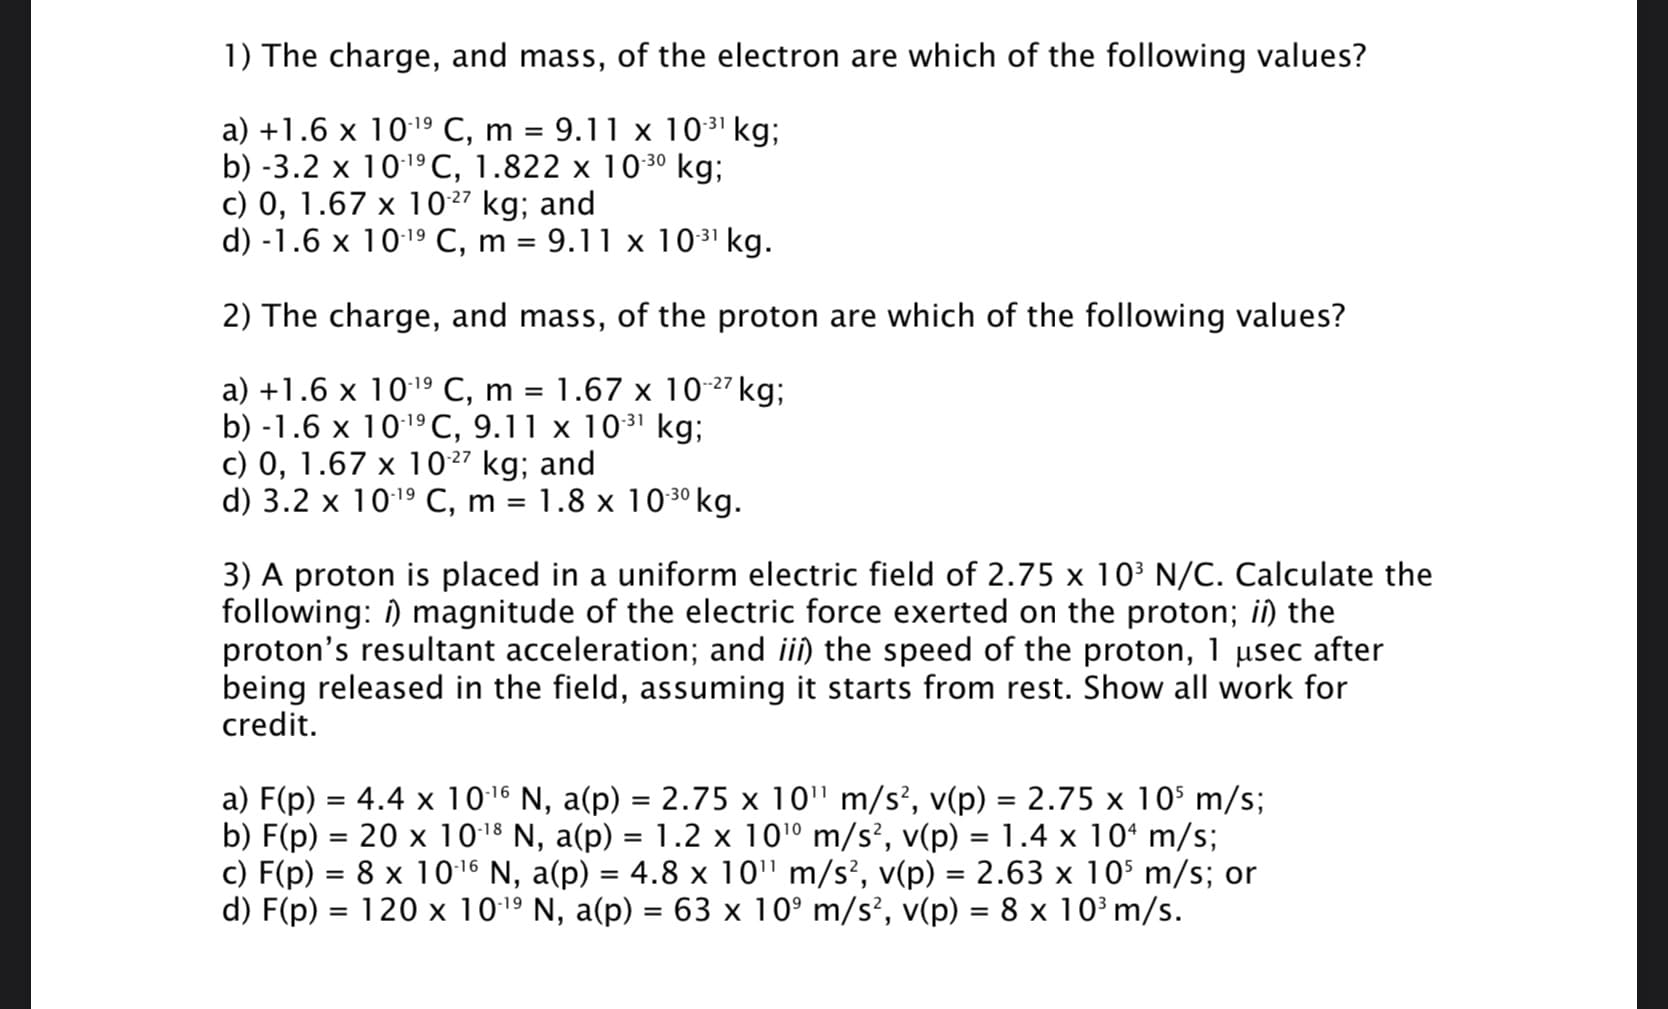 1) The charge, and mass, of the electron are which of the following values?
9.11 x 1031 kg;
a) +1.6 х 10 19 С, m %3D
b) -3.2 x 1019C, 1.822 x 10 30 kg;
c) 0, 1.67 x 1027 kg; and
d) -1.6 x 10:19 C, m = 9.11 x 1031 kg.
2) The charge, and mass, of the proton are which of the following values?
a) +1.6 x 10:19 C, m = 1.67 x 10-27 kg;
b) -1.6 x 1019C, 9.11 x 10³1 kg;
c) 0, 1.67 x 1027 kg; and
d) 3.2 x 1019 C, m = 1.8 x 10 3º kg.
-30
3) A proton is placed in a uniform electric field of 2.75 x 103 N/C. Calculate the
following: i) magnitude of the electric force exerted on the proton; iî) the
proton's resultant acceleration; and ii) the speed of the proton, 1 µsec after
being released in the field, assuming it starts from rest. Show all work for
credit.
a) F(p) = 4.4 x 1016 N, a(p) = 2.75 x 10" m/s?, v(p) = 2.75 x 10$ m/s;
b) F(p) = 20 x 10:18 N, a(p) = 1.2 x 10'º m/s², v(p) = 1.4 x 10ʻ m/s;
c) F(p) = 8 x 1016 N, a(p) = 4.8 x 10" m/s², v(p) = 2.63 x 10$ m/s; or
d) F(p) = 120 x 1019 N, a(p) = 63 x 10° m/s², v(p) = 8 x 10 m/s.
%D
%3D
%3D
